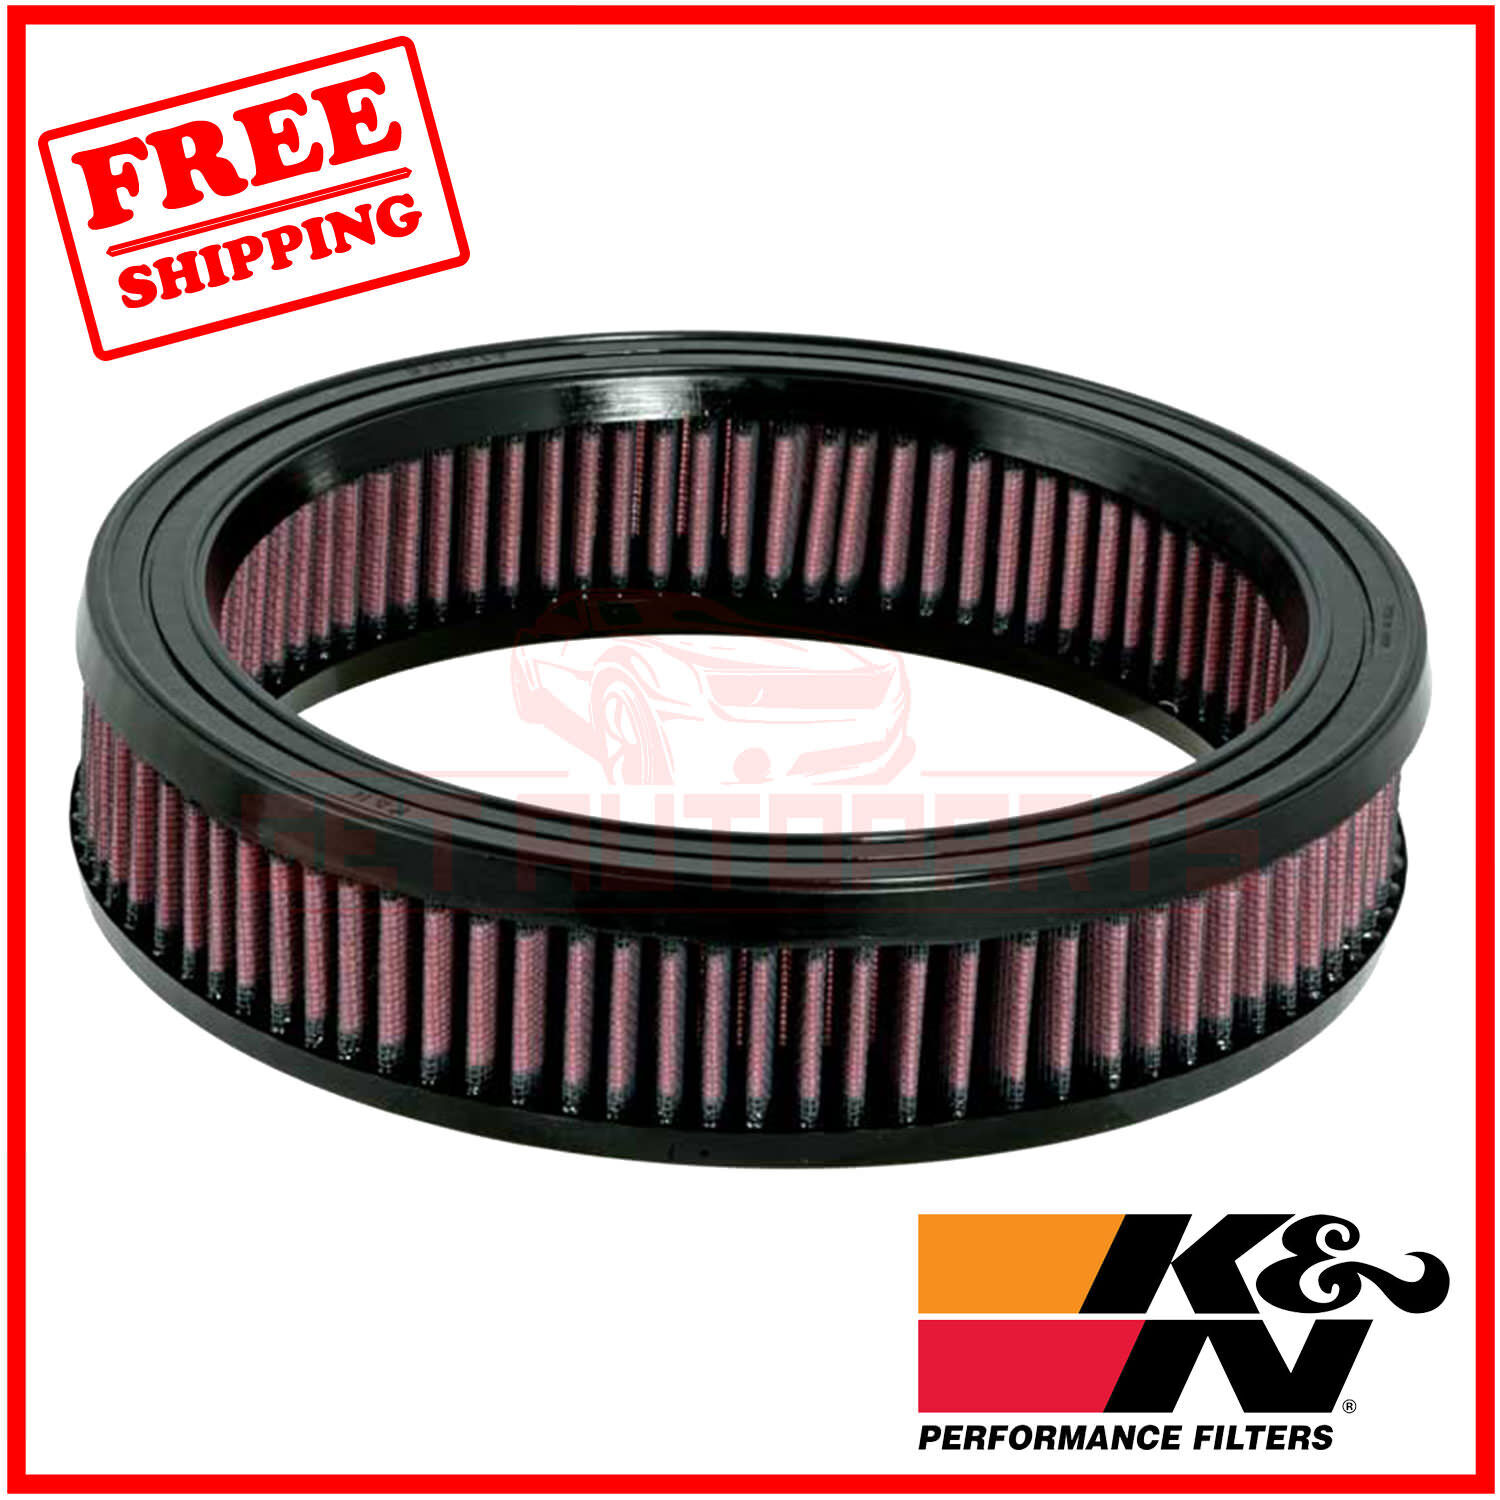 K&N Replacement Air Filter for Dodge B200 1979